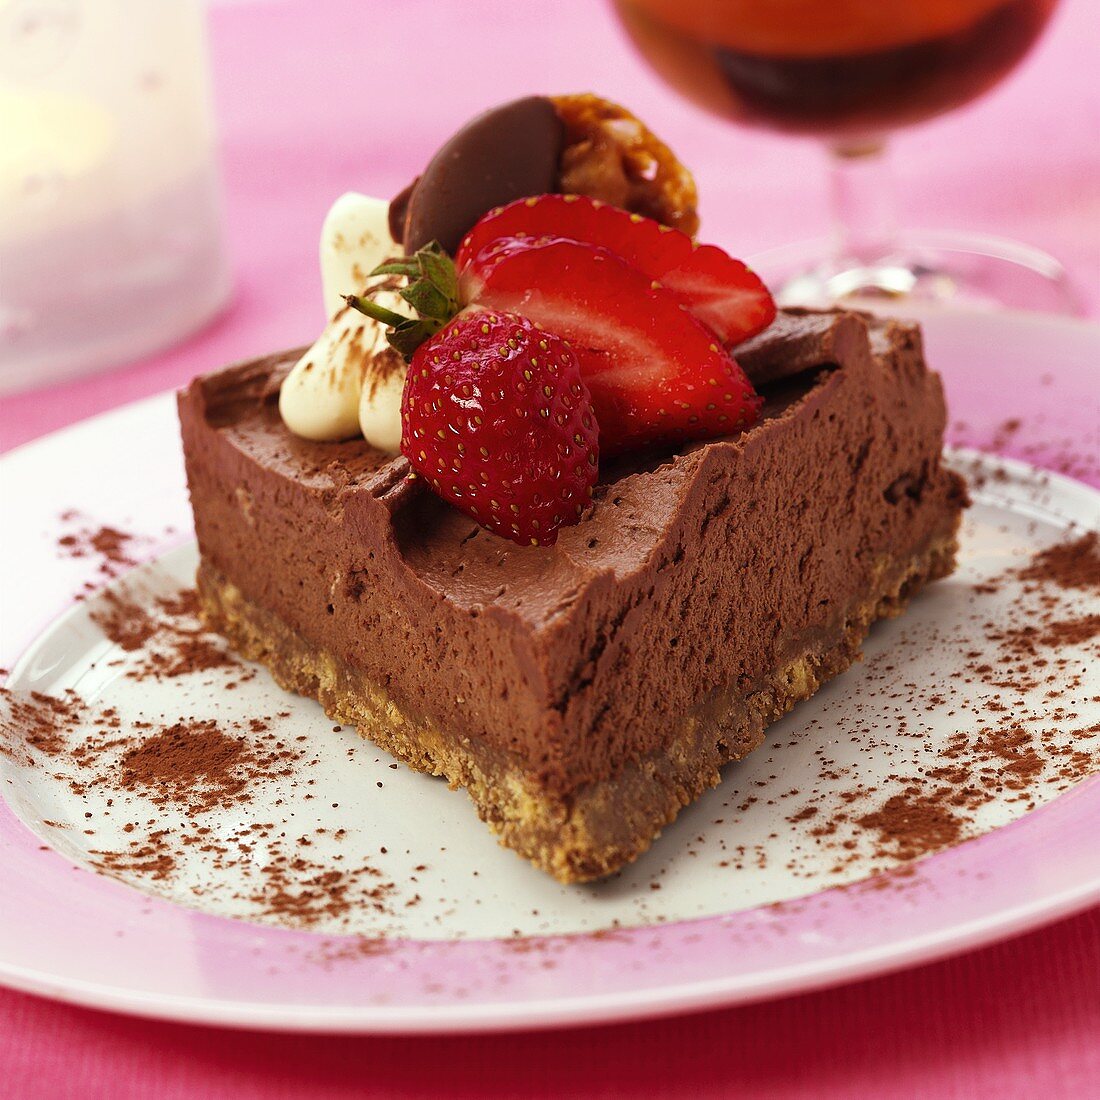 Piece of chocolate mousse gateau with strawberries